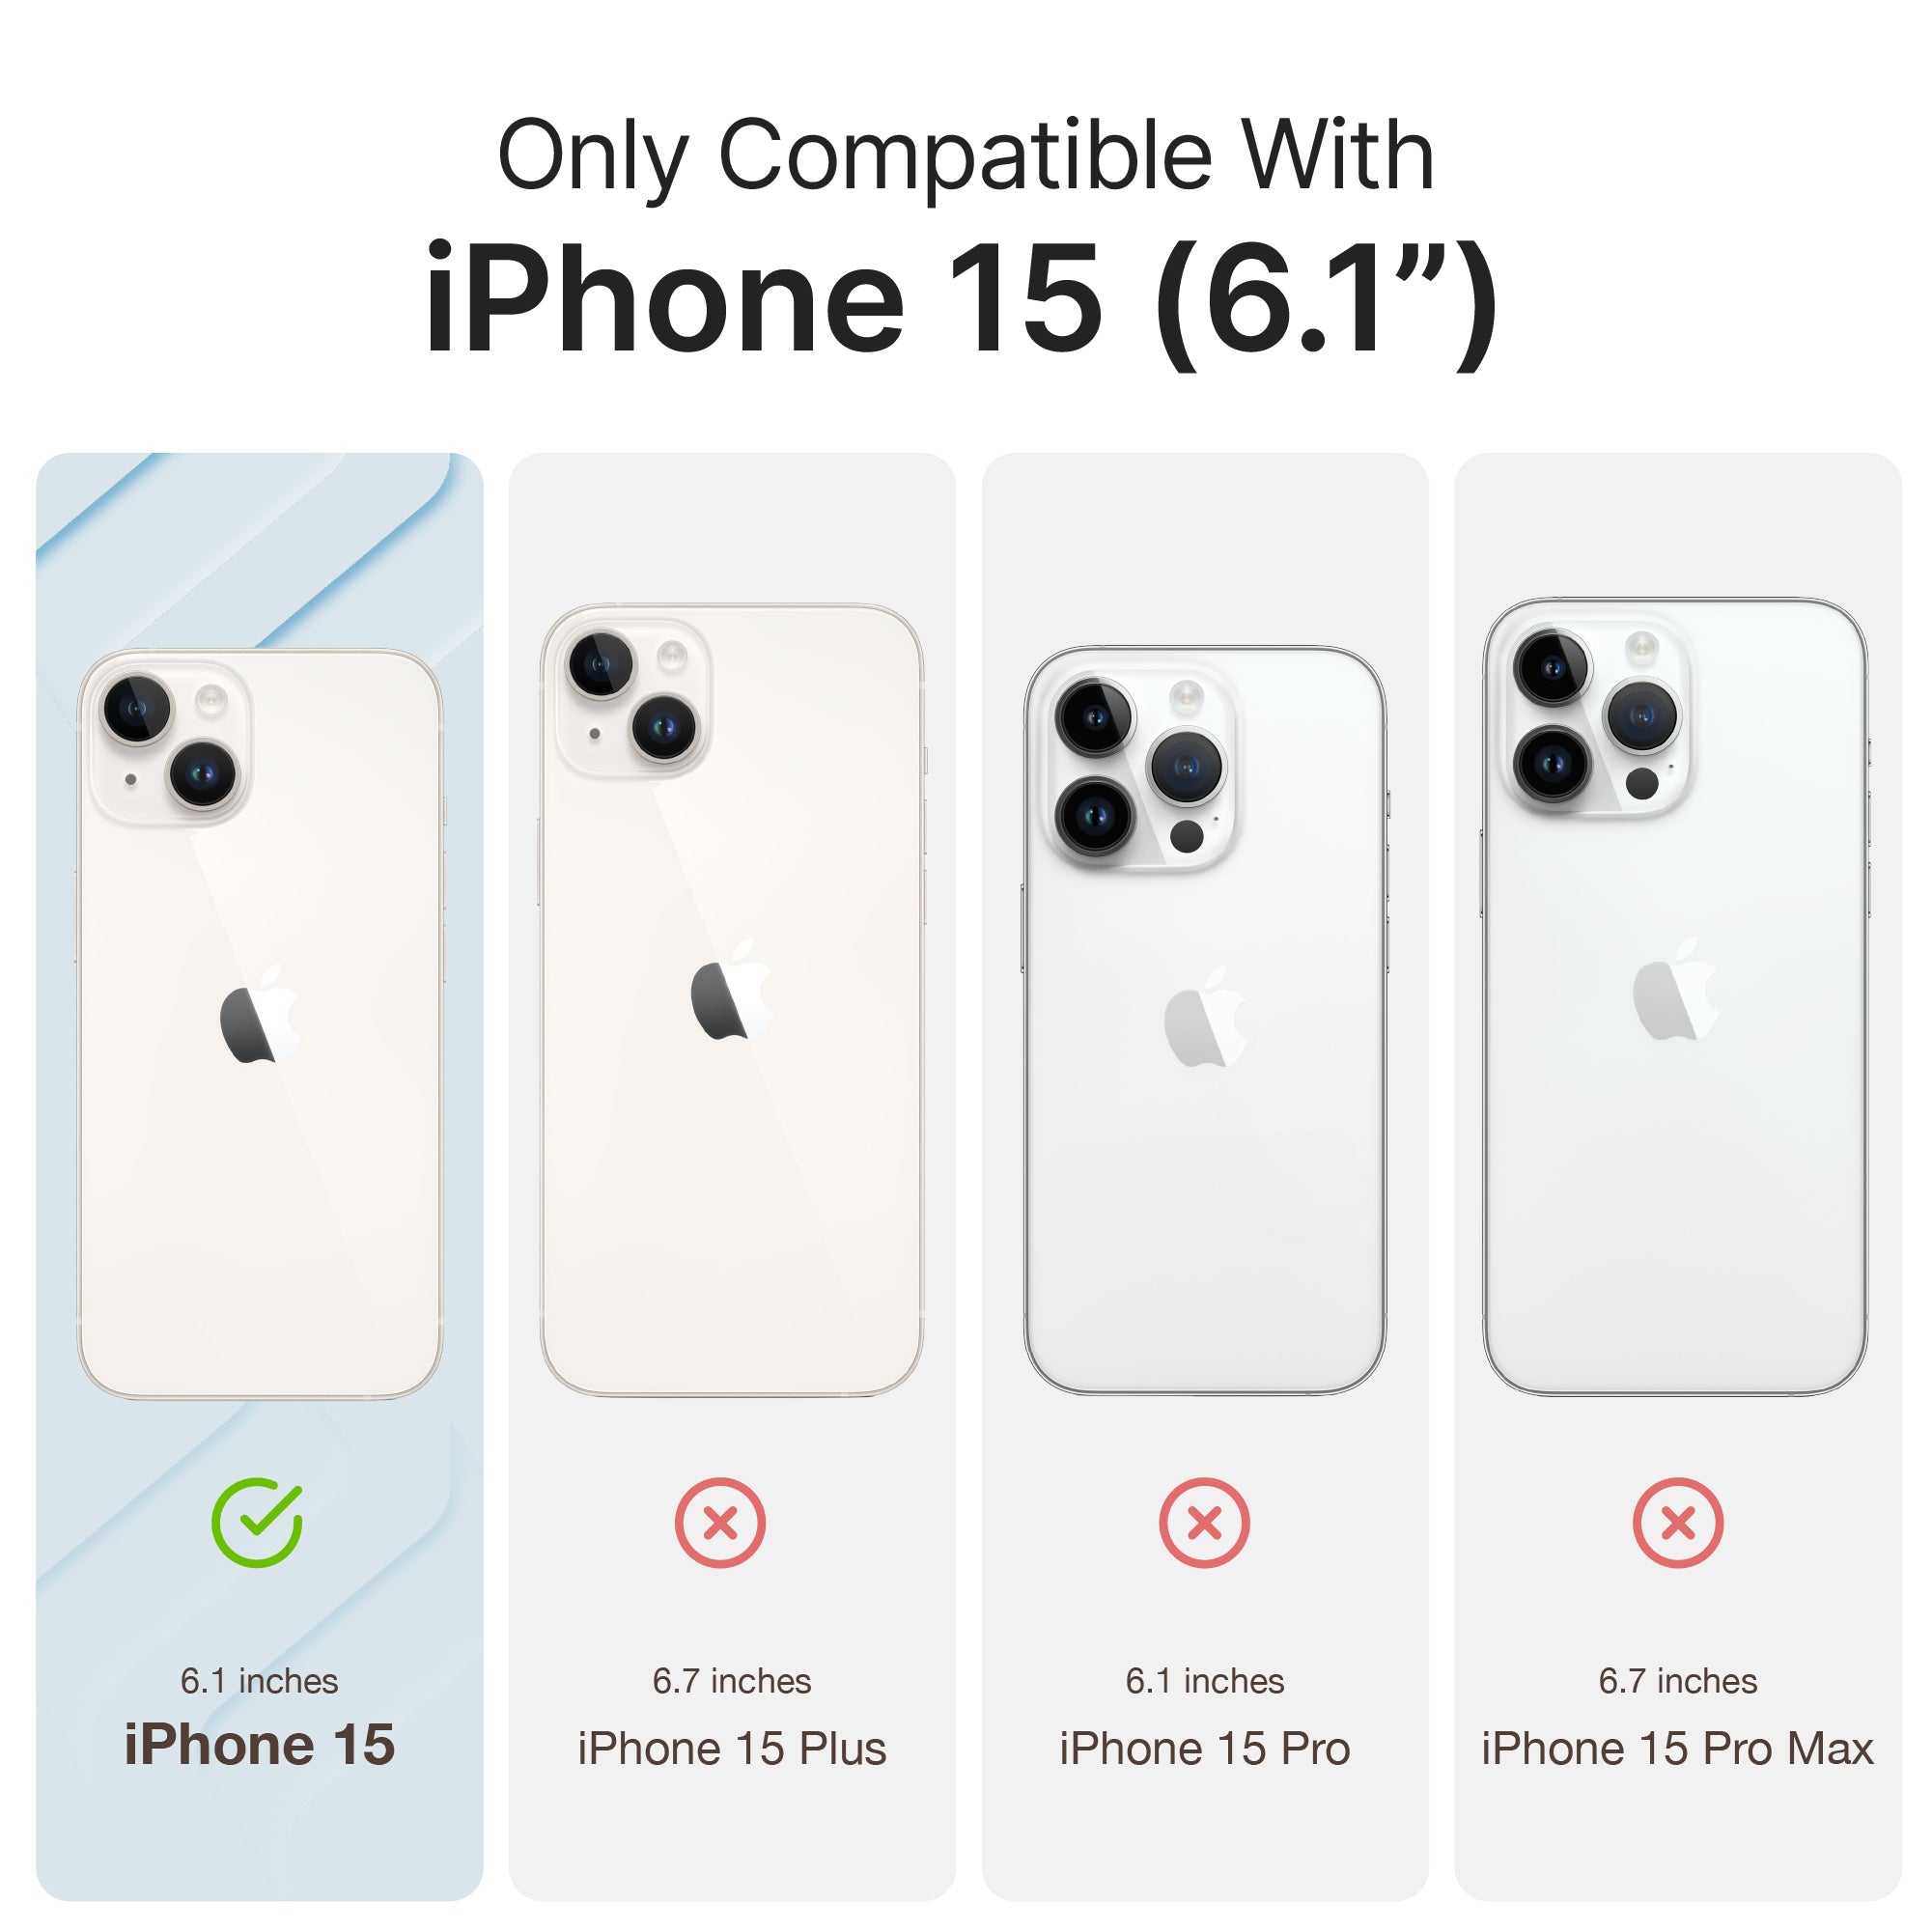 All the iPhone 15 models compared